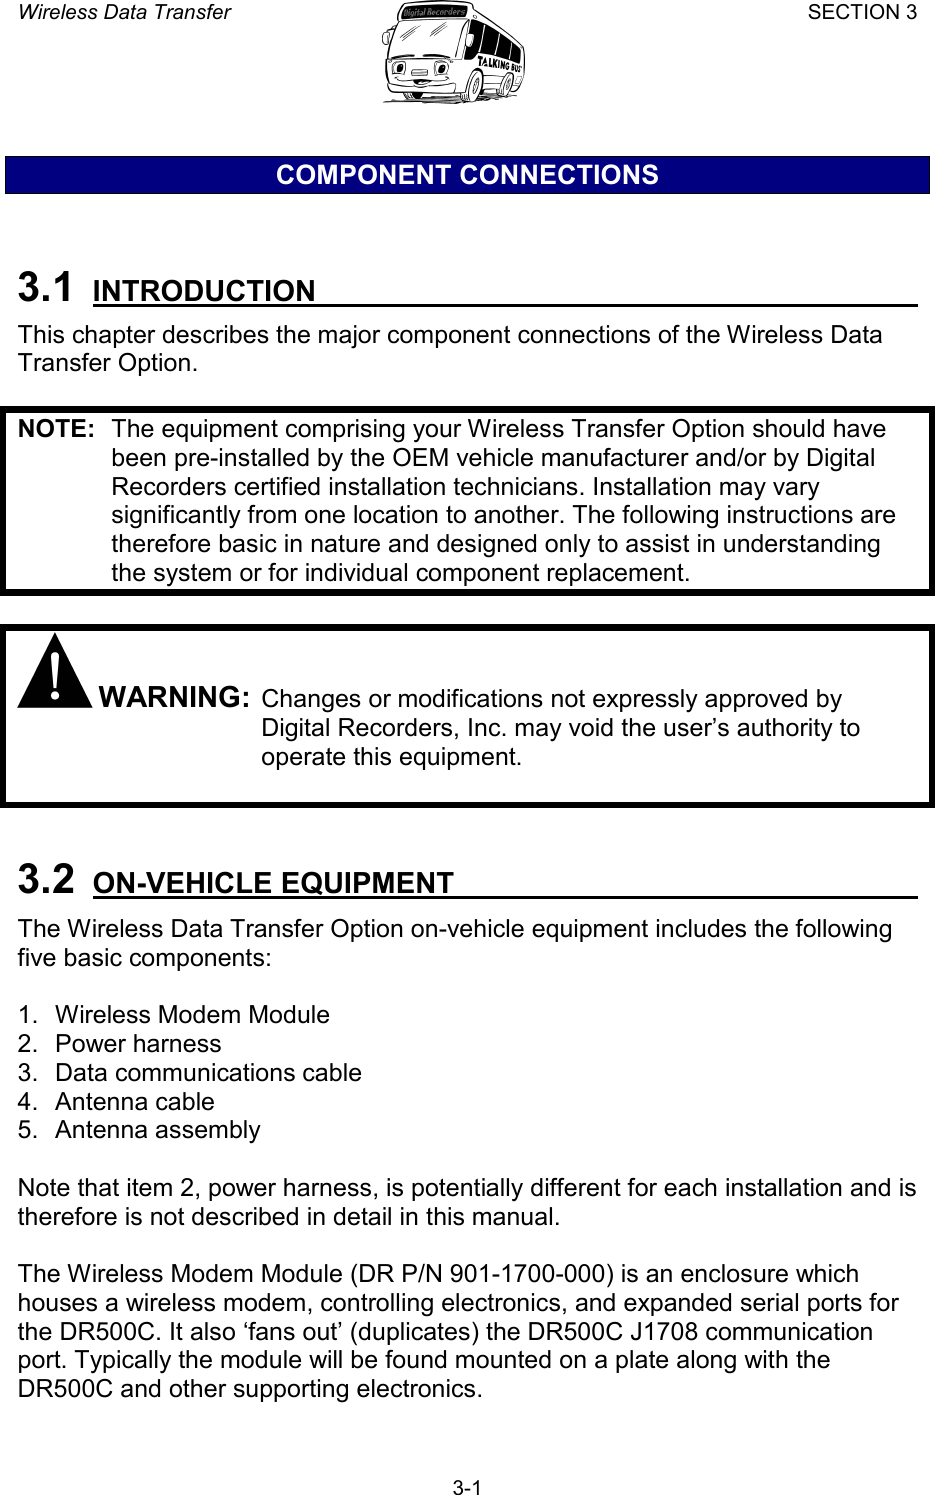 Wireless Data Transfer SECTION 3       3-1 COMPONENT CONNECTIONS  3.1  INTRODUCTION   This chapter describes the major component connections of the Wireless Data Transfer Option.  NOTE:  The equipment comprising your Wireless Transfer Option should have been pre-installed by the OEM vehicle manufacturer and/or by Digital Recorders certified installation technicians. Installation may vary significantly from one location to another. The following instructions are therefore basic in nature and designed only to assist in understanding the system or for individual component replacement.   WARNING: Changes or modifications not expressly approved by Digital Recorders, Inc. may void the user’s authority to operate this equipment.   3.2 ON-VEHICLE EQUIPMENT   The Wireless Data Transfer Option on-vehicle equipment includes the following five basic components:  1.  Wireless Modem Module 2. Power harness 3. Data communications cable 4. Antenna cable 5. Antenna assembly  Note that item 2, power harness, is potentially different for each installation and is therefore is not described in detail in this manual.  The Wireless Modem Module (DR P/N 901-1700-000) is an enclosure which houses a wireless modem, controlling electronics, and expanded serial ports for the DR500C. It also ‘fans out’ (duplicates) the DR500C J1708 communication port. Typically the module will be found mounted on a plate along with the DR500C and other supporting electronics. 